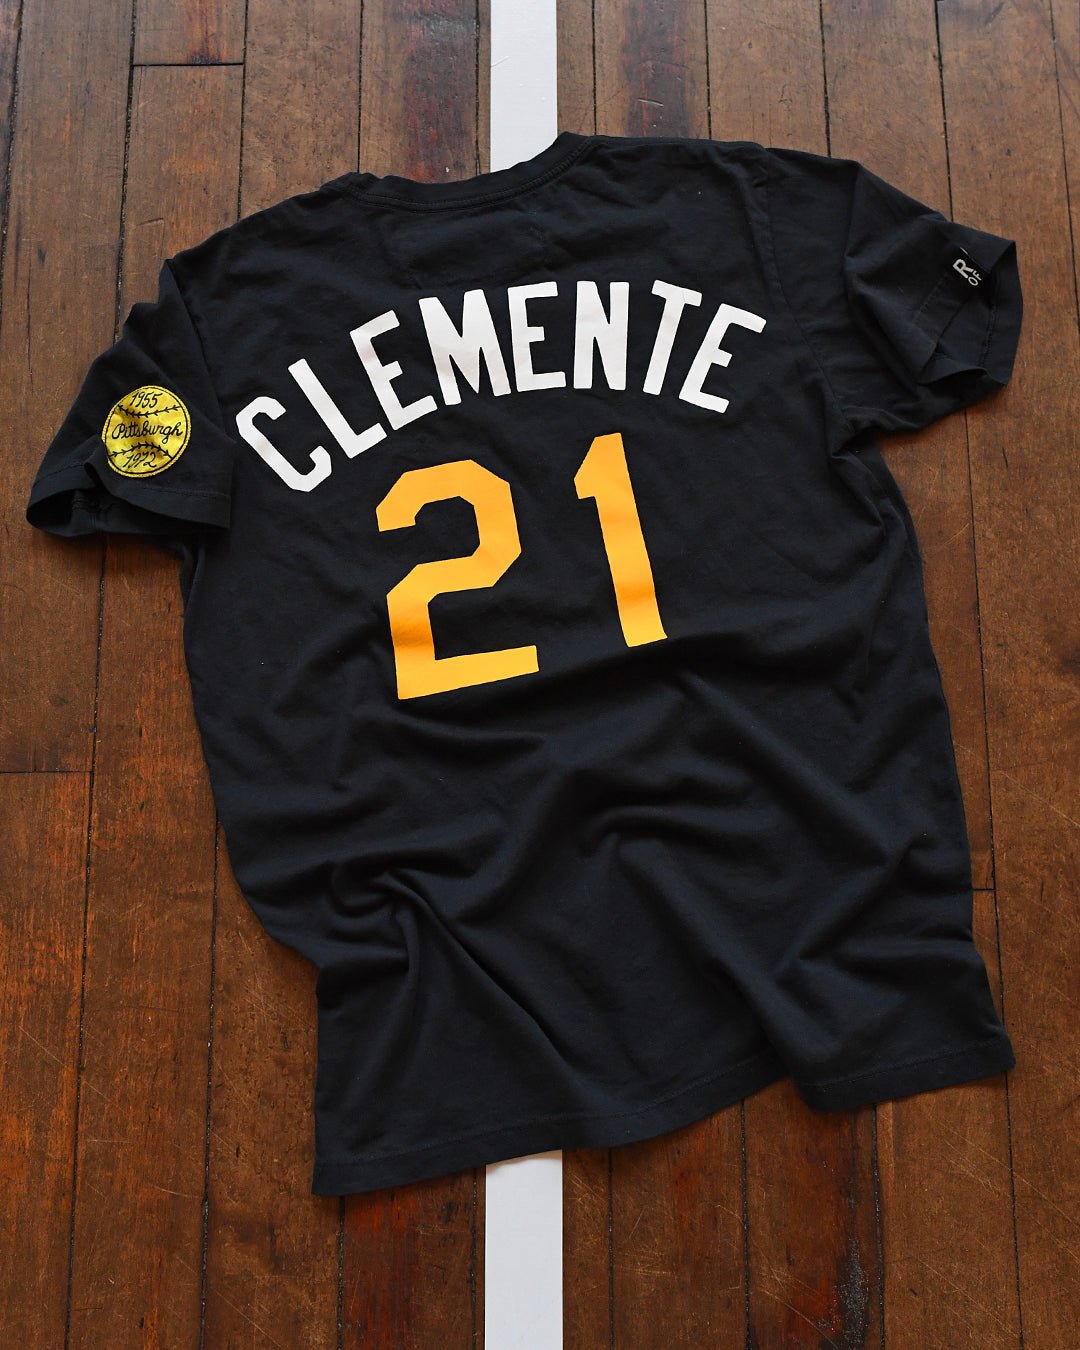 Men's Nike Roberto Clemente Pittsburgh Pirates Cooperstown Collection Name  & Number Black T-Shirt